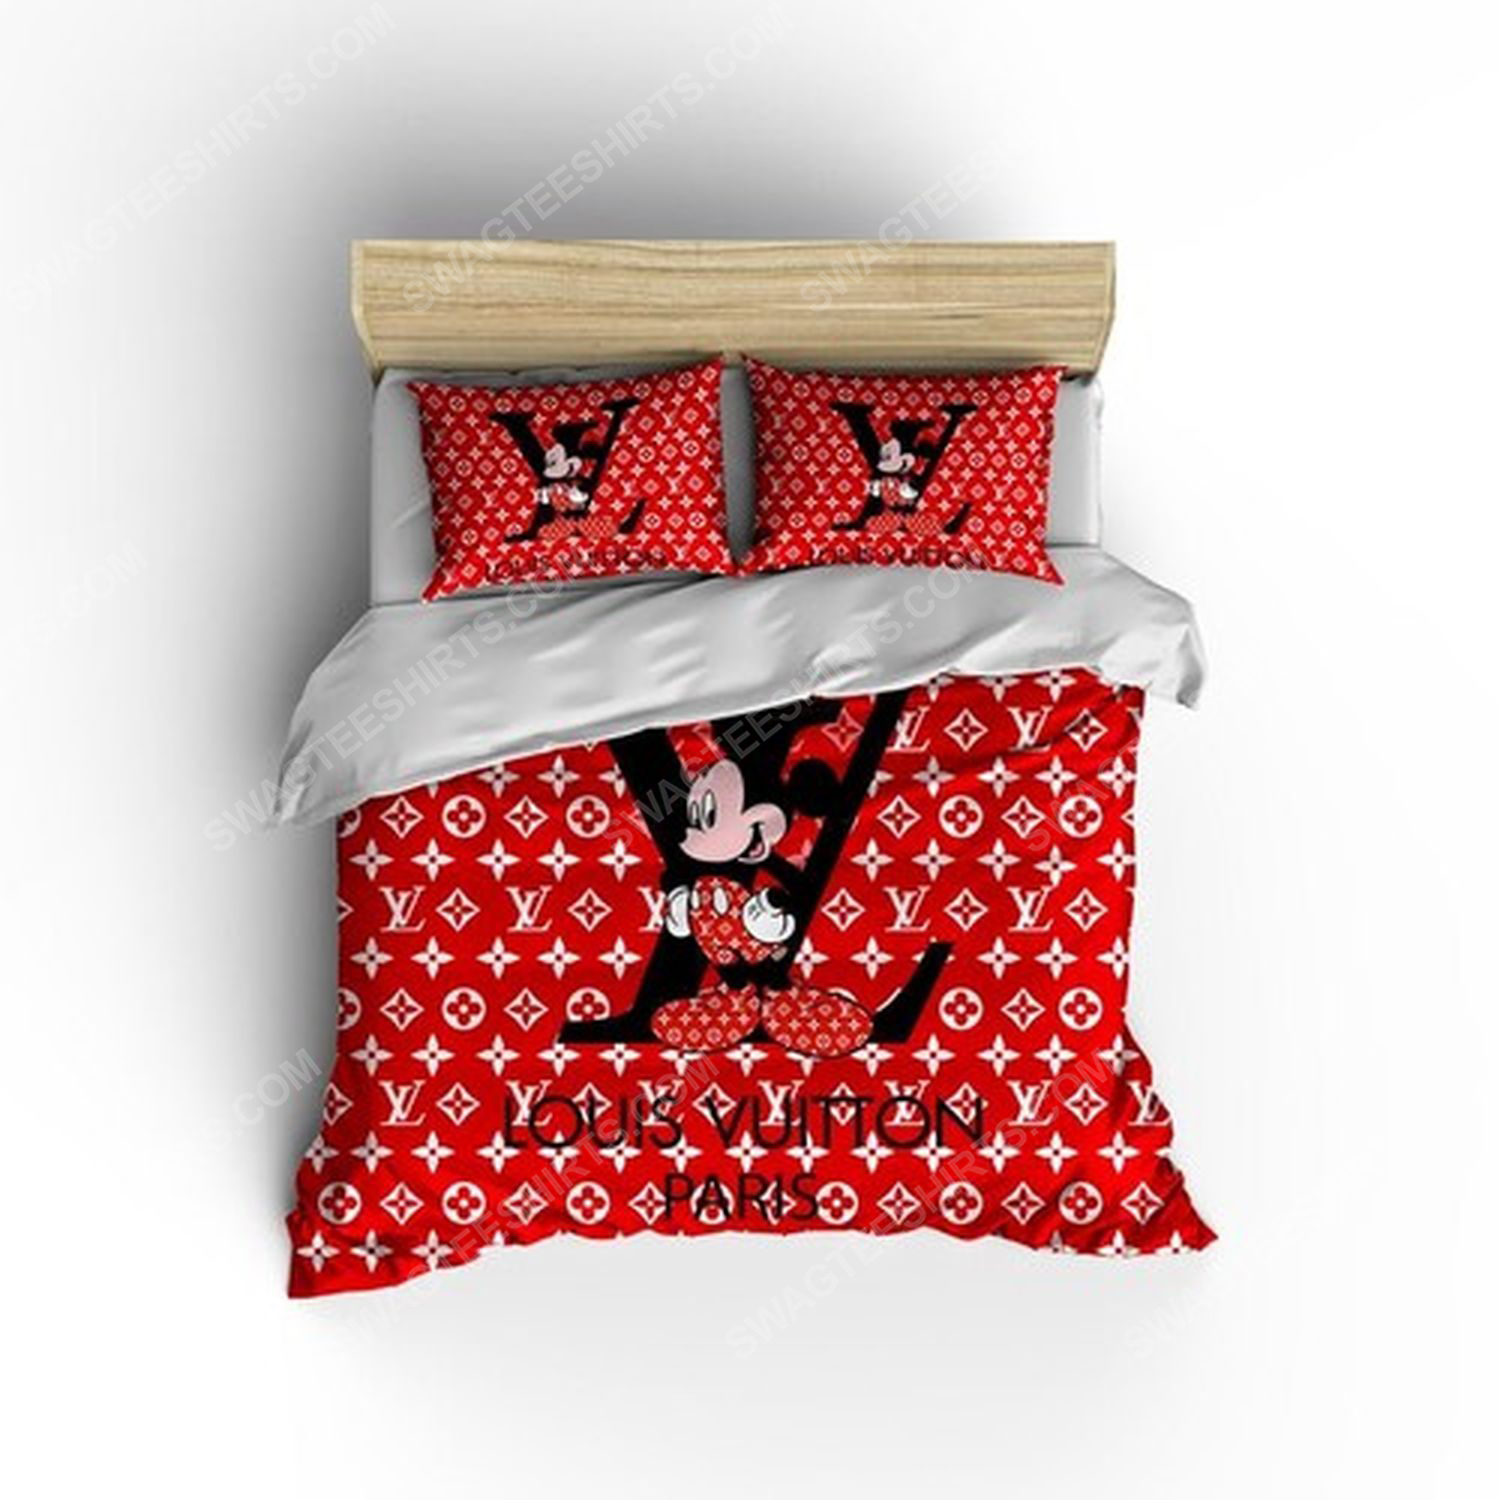 Lv and mickey mouse full print duvet cover bedding set 1